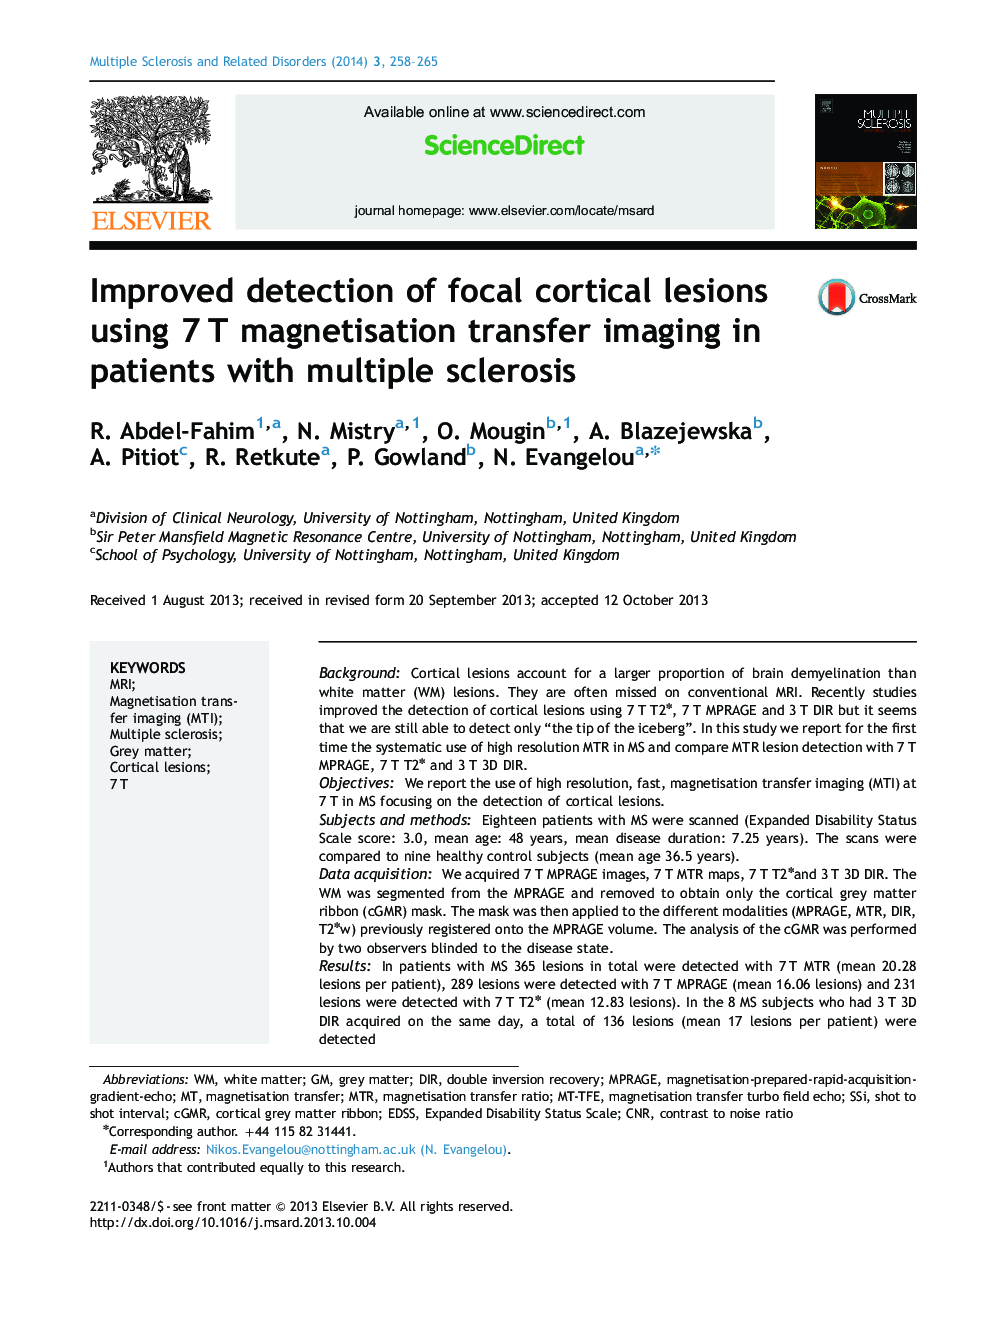 Improved detection of focal cortical lesions using 7Â T magnetisation transfer imaging in patients with multiple sclerosis